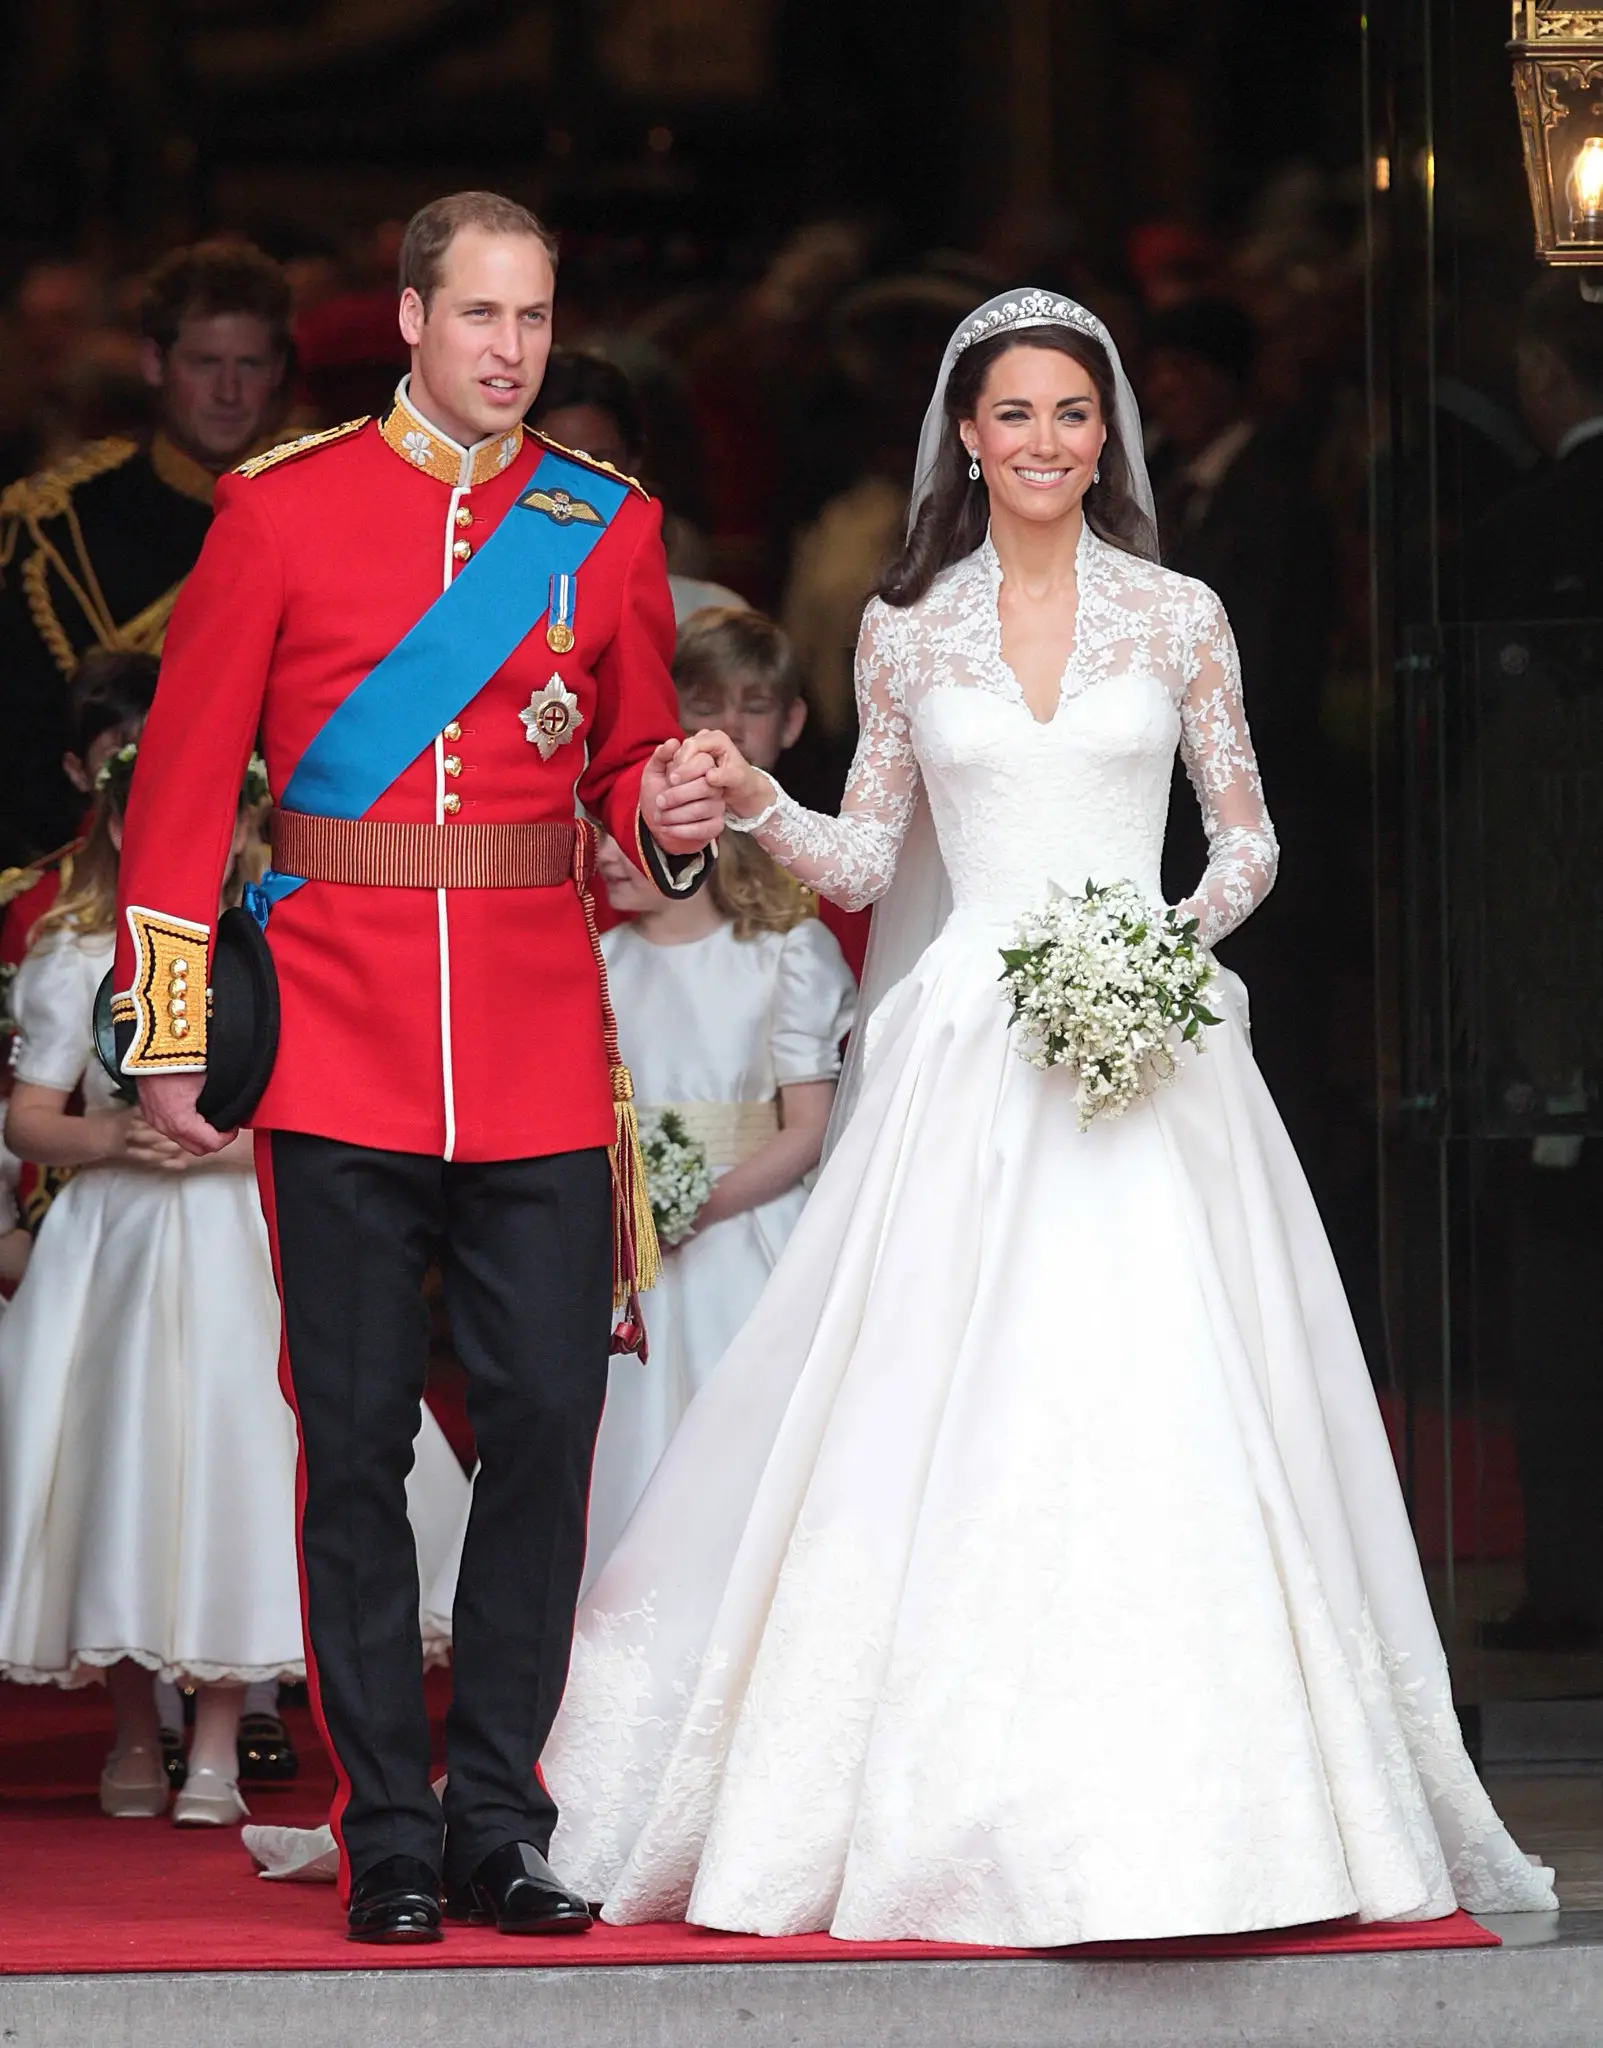 Newly Married the Duke and Duchess of Cambridge stepped out of the Westminster Abbey after their wedding